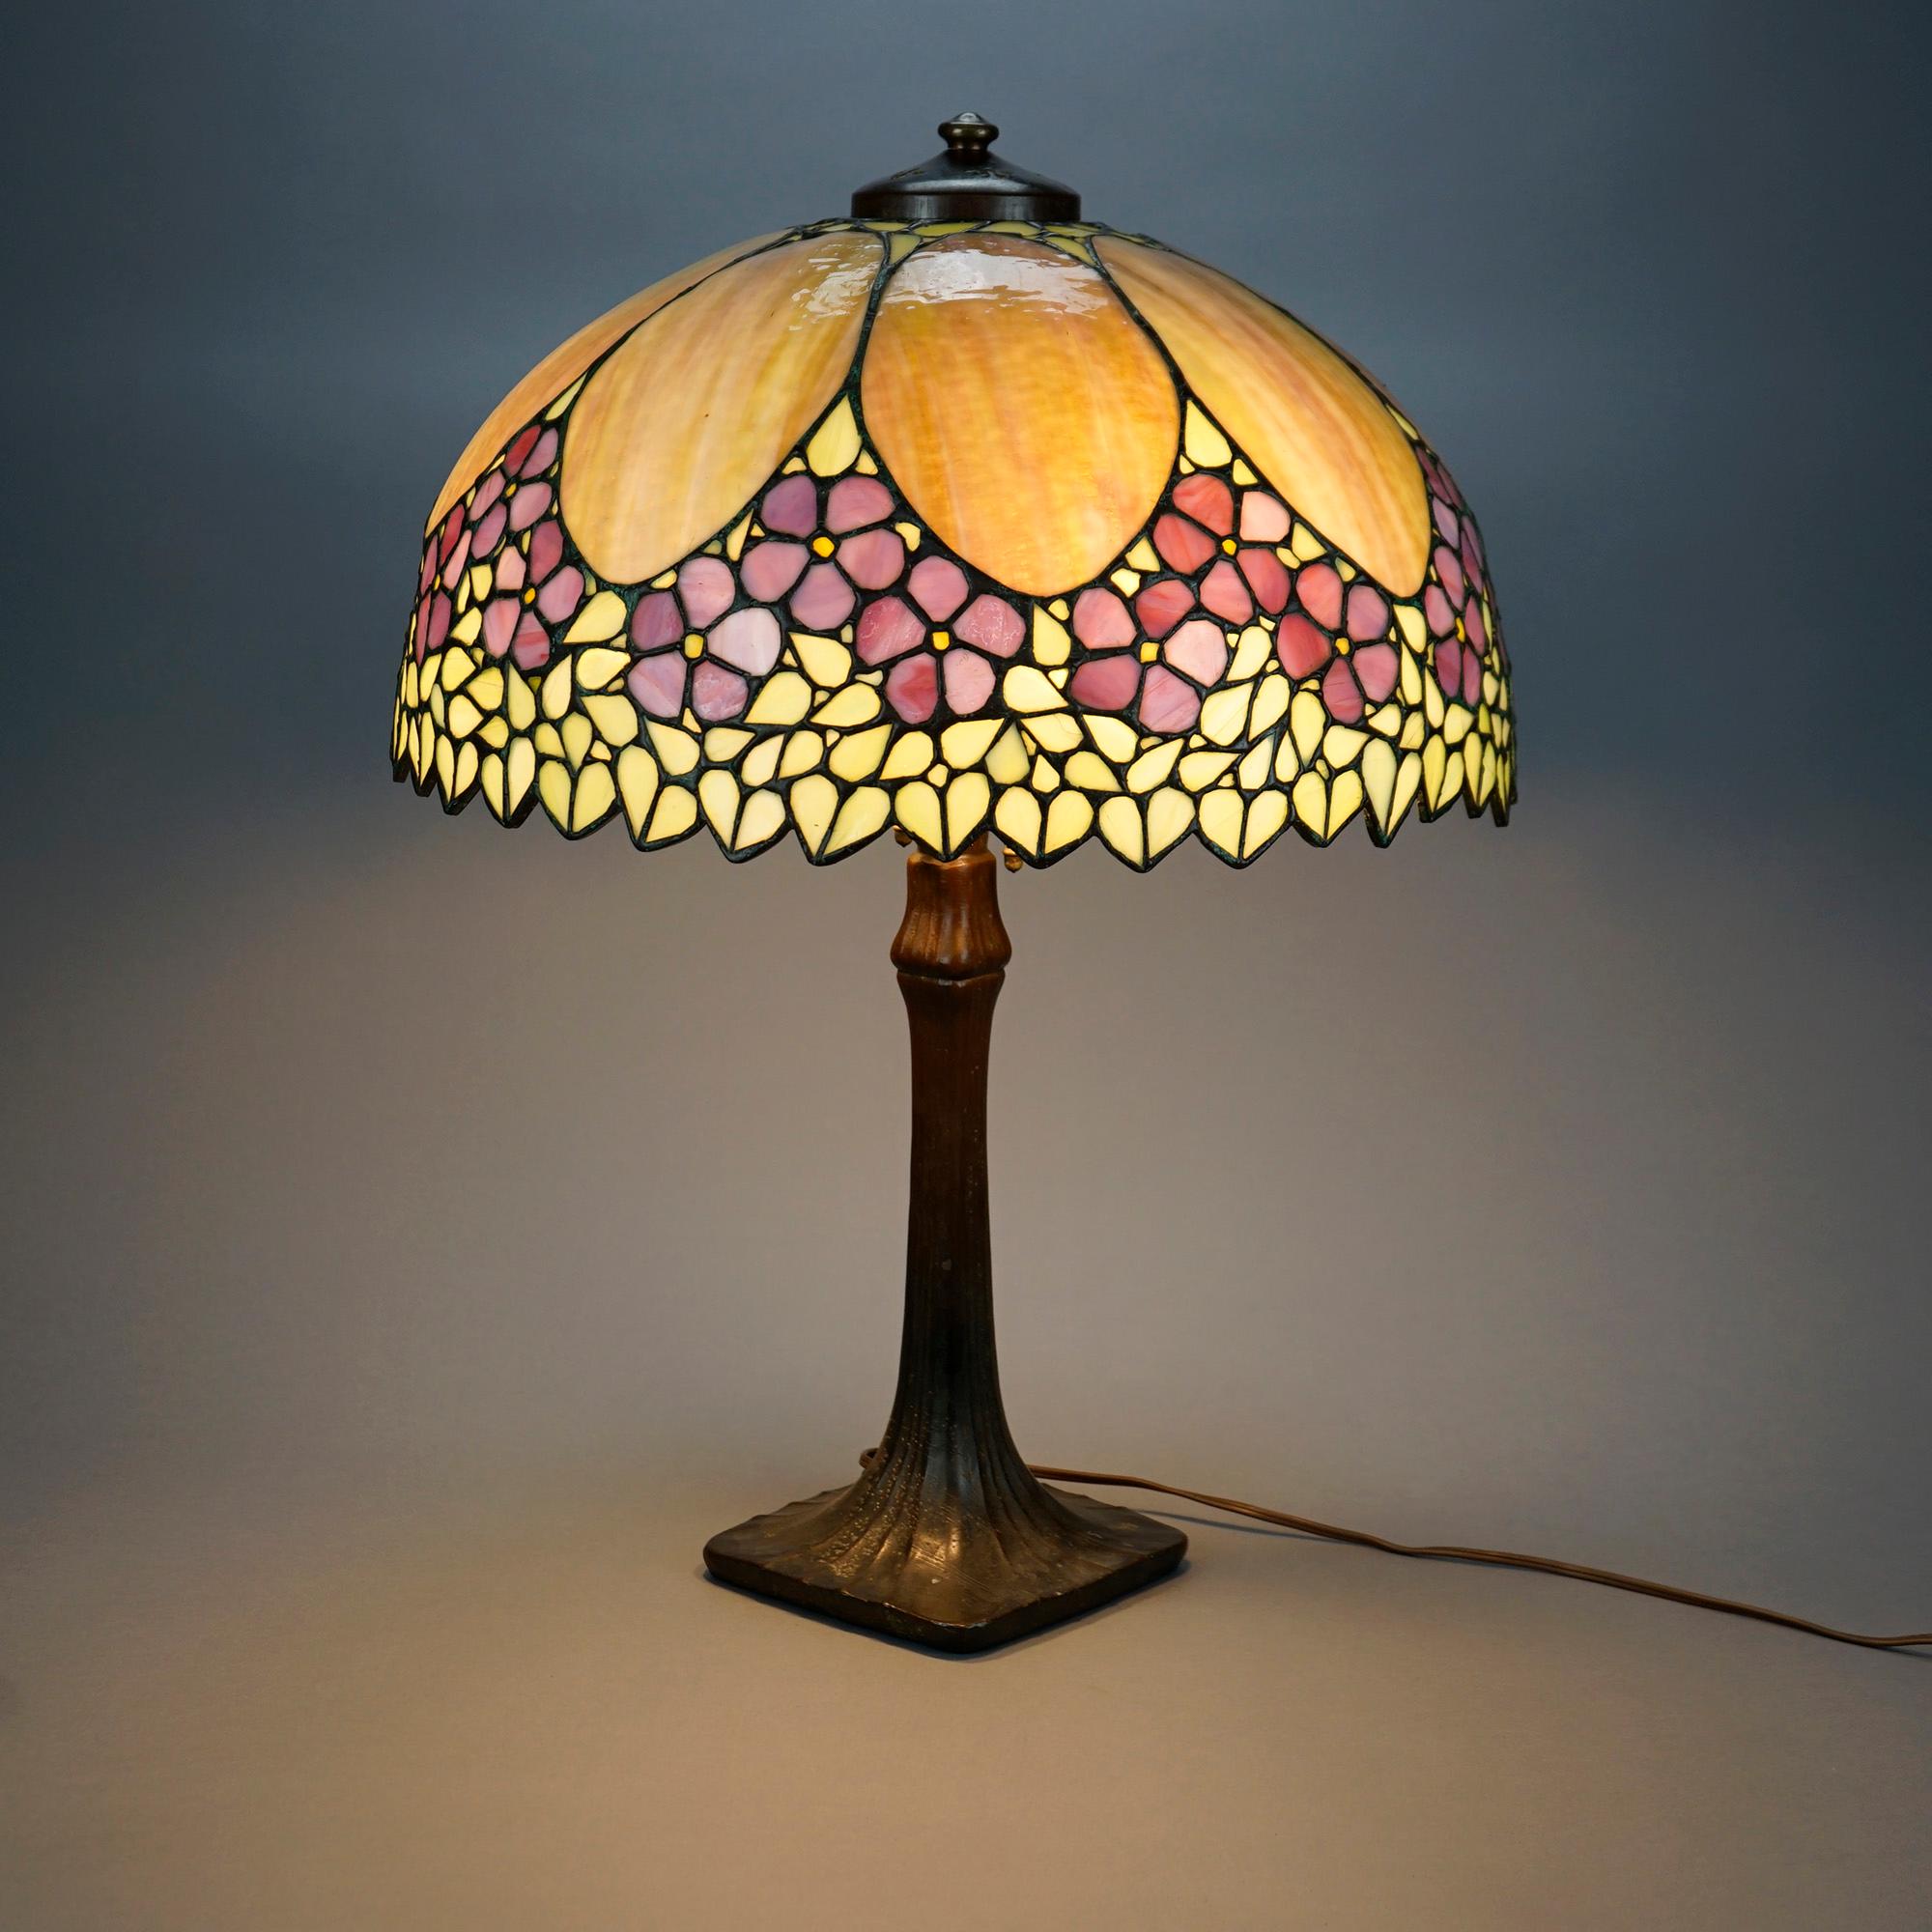 An antique Arts & Crafts table lamp with dome form leaded glass Unique shade having flowers and stylized leaves over Handel double socket tree trunk base, c1910

Measures- 24.5''H x 18.25''W x 18.25''D.

Catalogue Note: Ask about DISCOUNTED DELIVERY